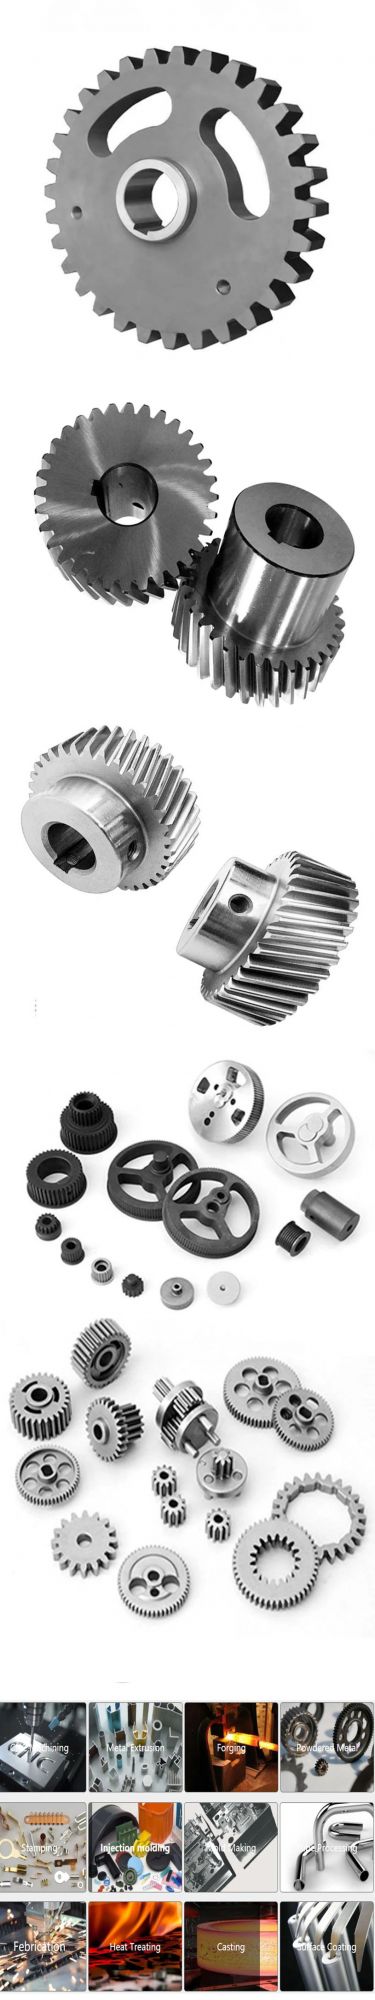 China Suppliers OEM Aluminum Brass Stainless Steel Small Gear Parts